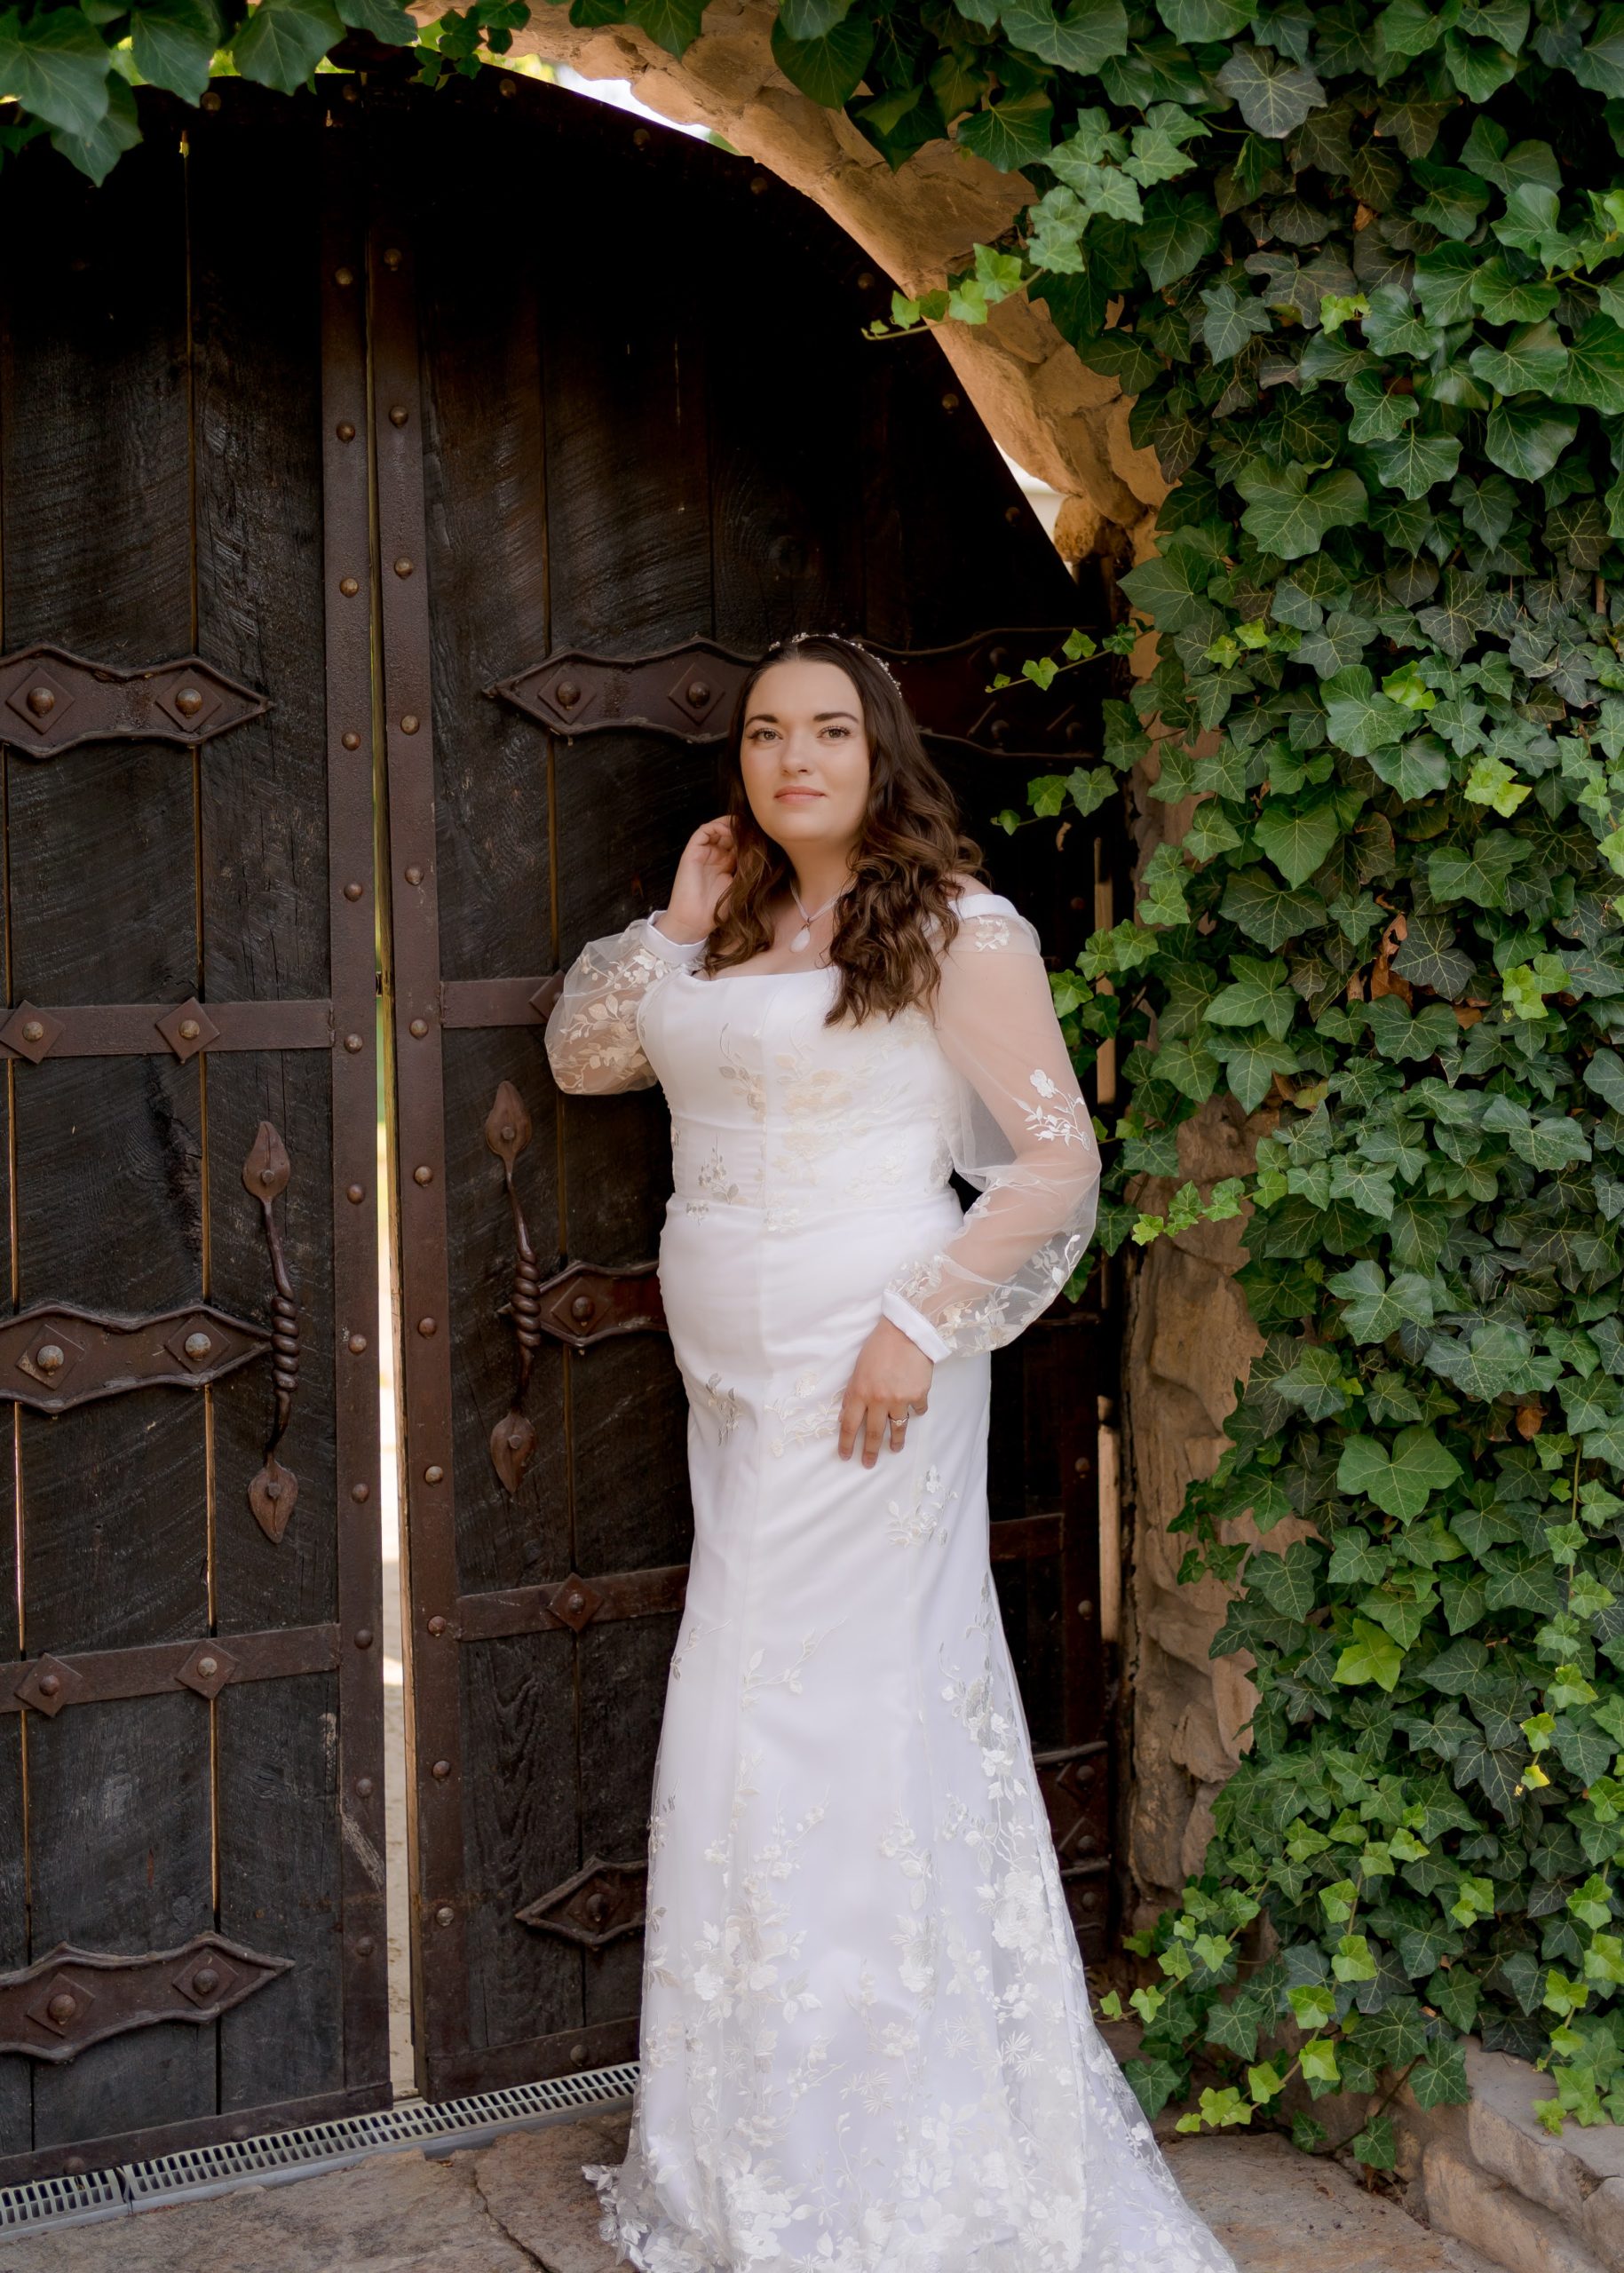 Plus Size Wedding Dresses With Sleeves: 21 Ideas For Bride | Plus size  wedding dresses with sleeves, Plus size wedding gowns, Plus wedding dresses